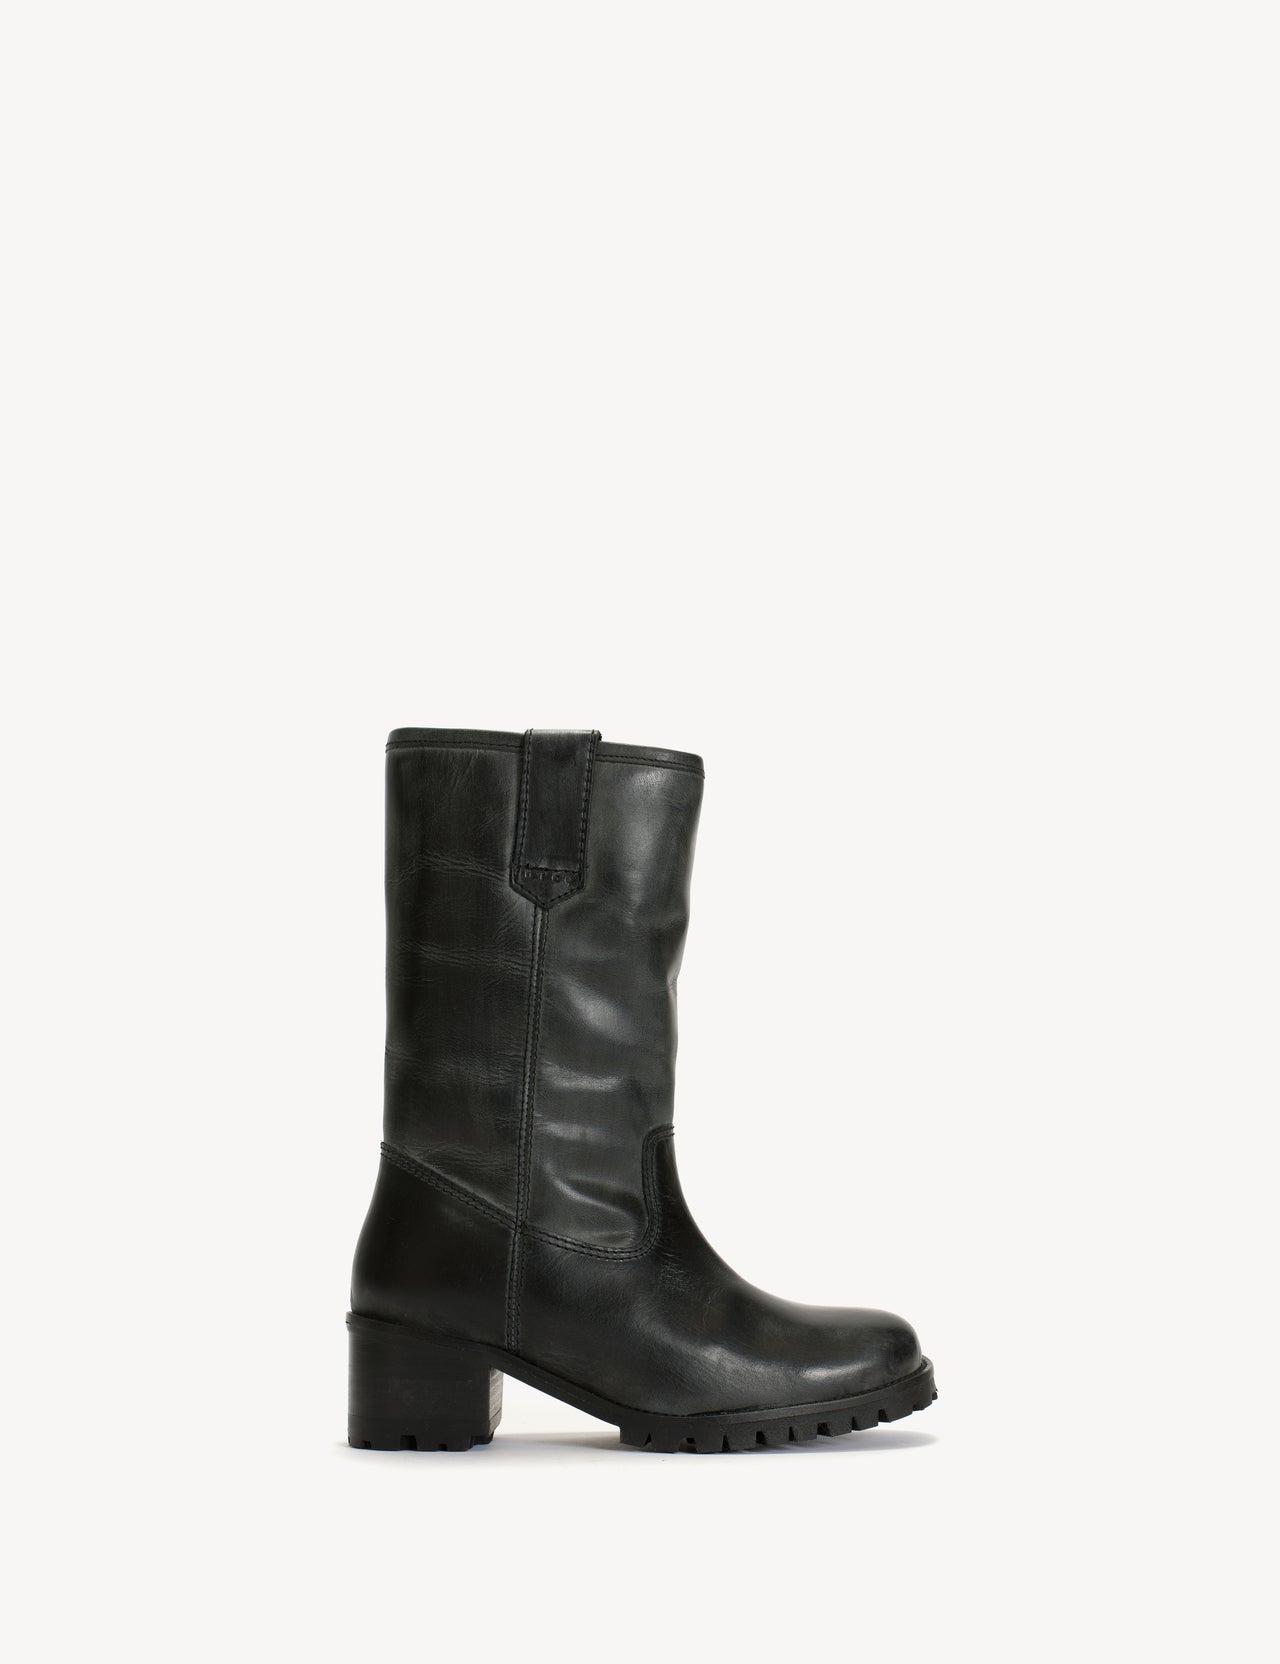 Kimmi Boot In Charcoal Black Escovado Leather with 50mm heel